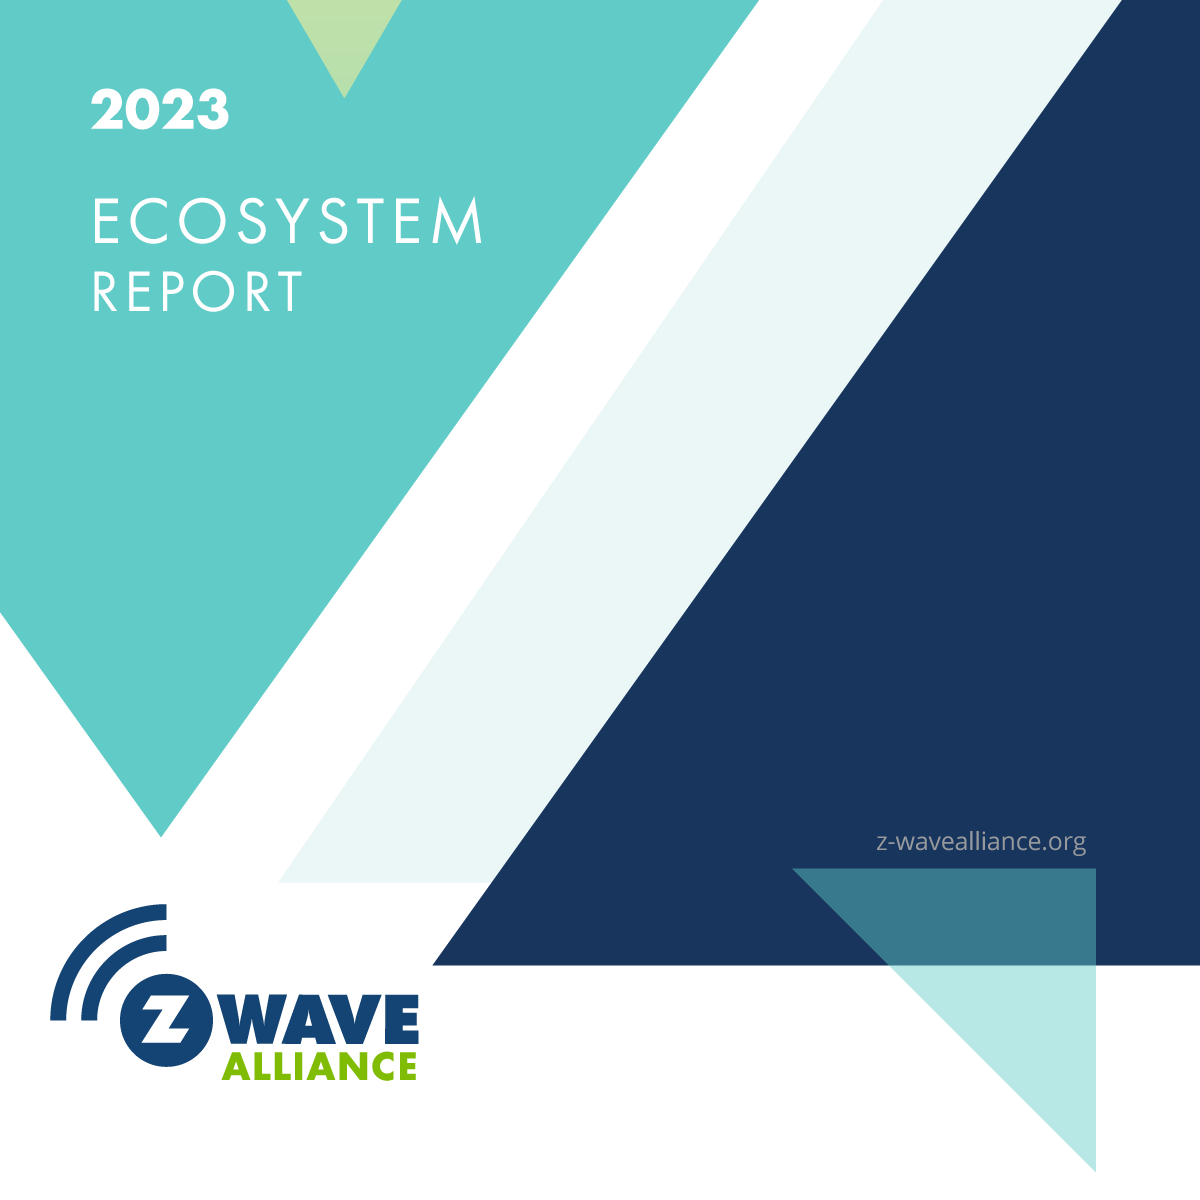 Research: Z-Wave Alliance Releases 2023 Ecosystem Report